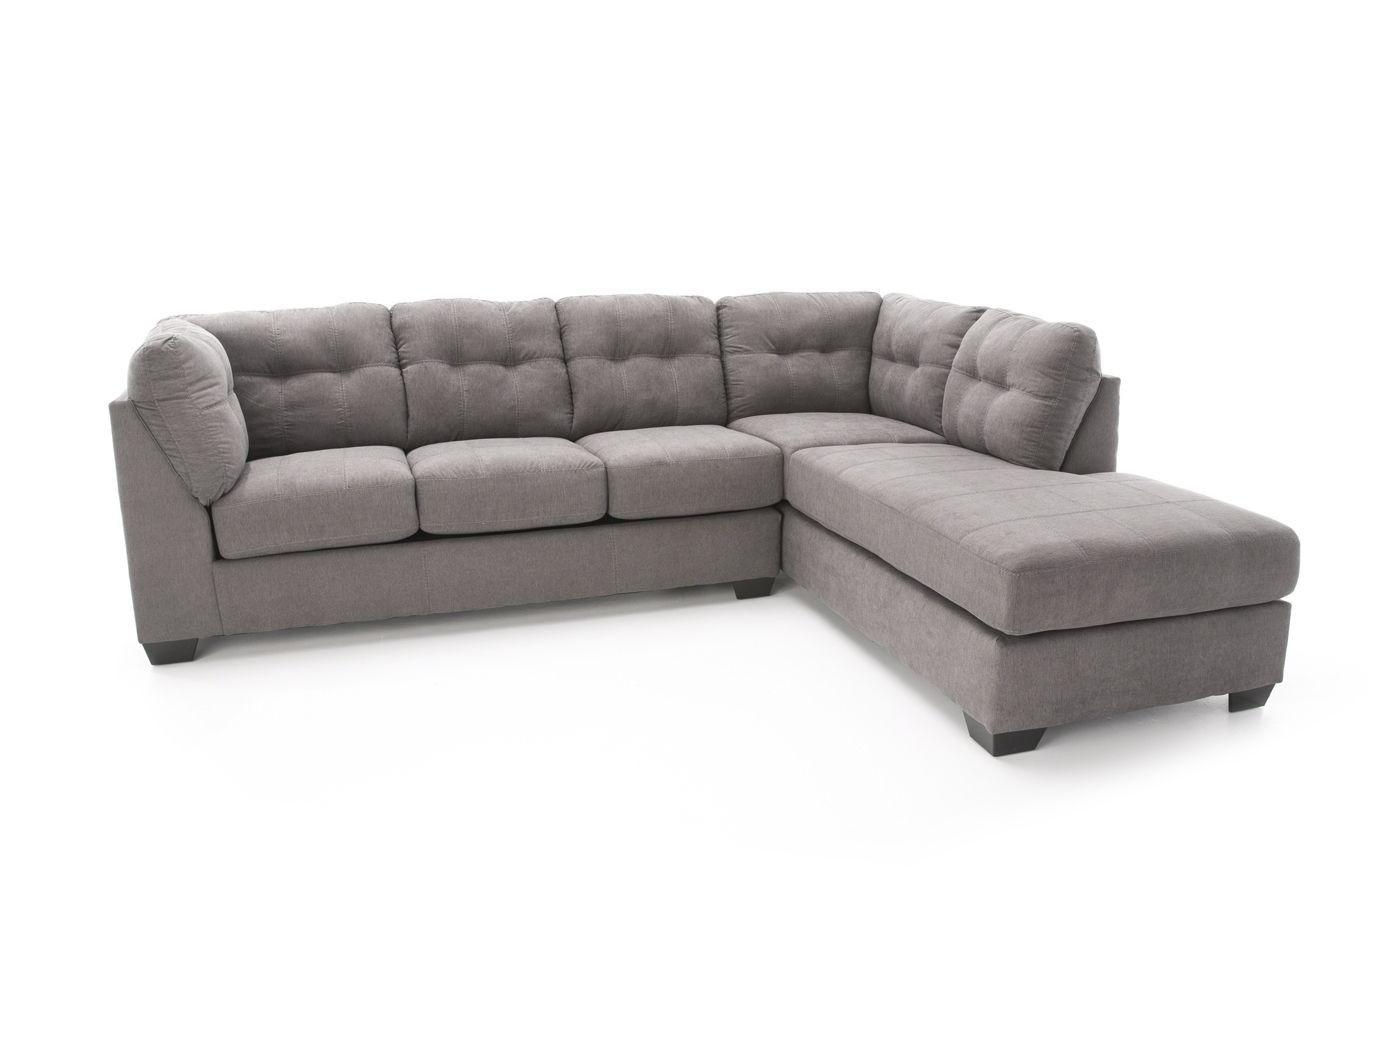 Living Room – Sectionals | Steinhafels With Marissa Ii 3 Piece Sectionals (View 10 of 30)